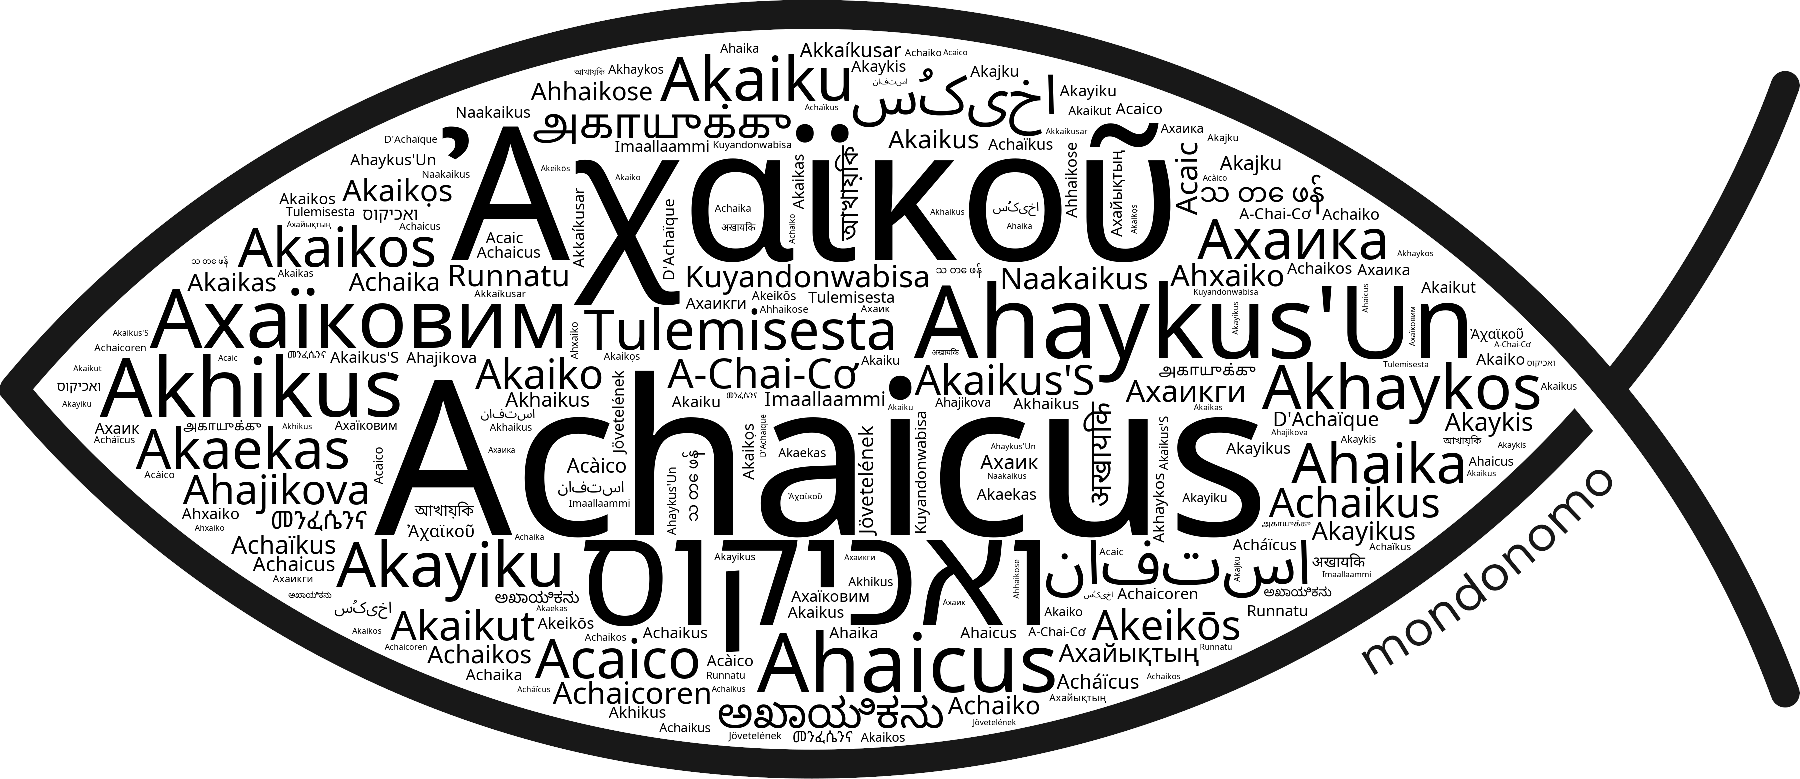 Name Achaicus in the world's Bibles